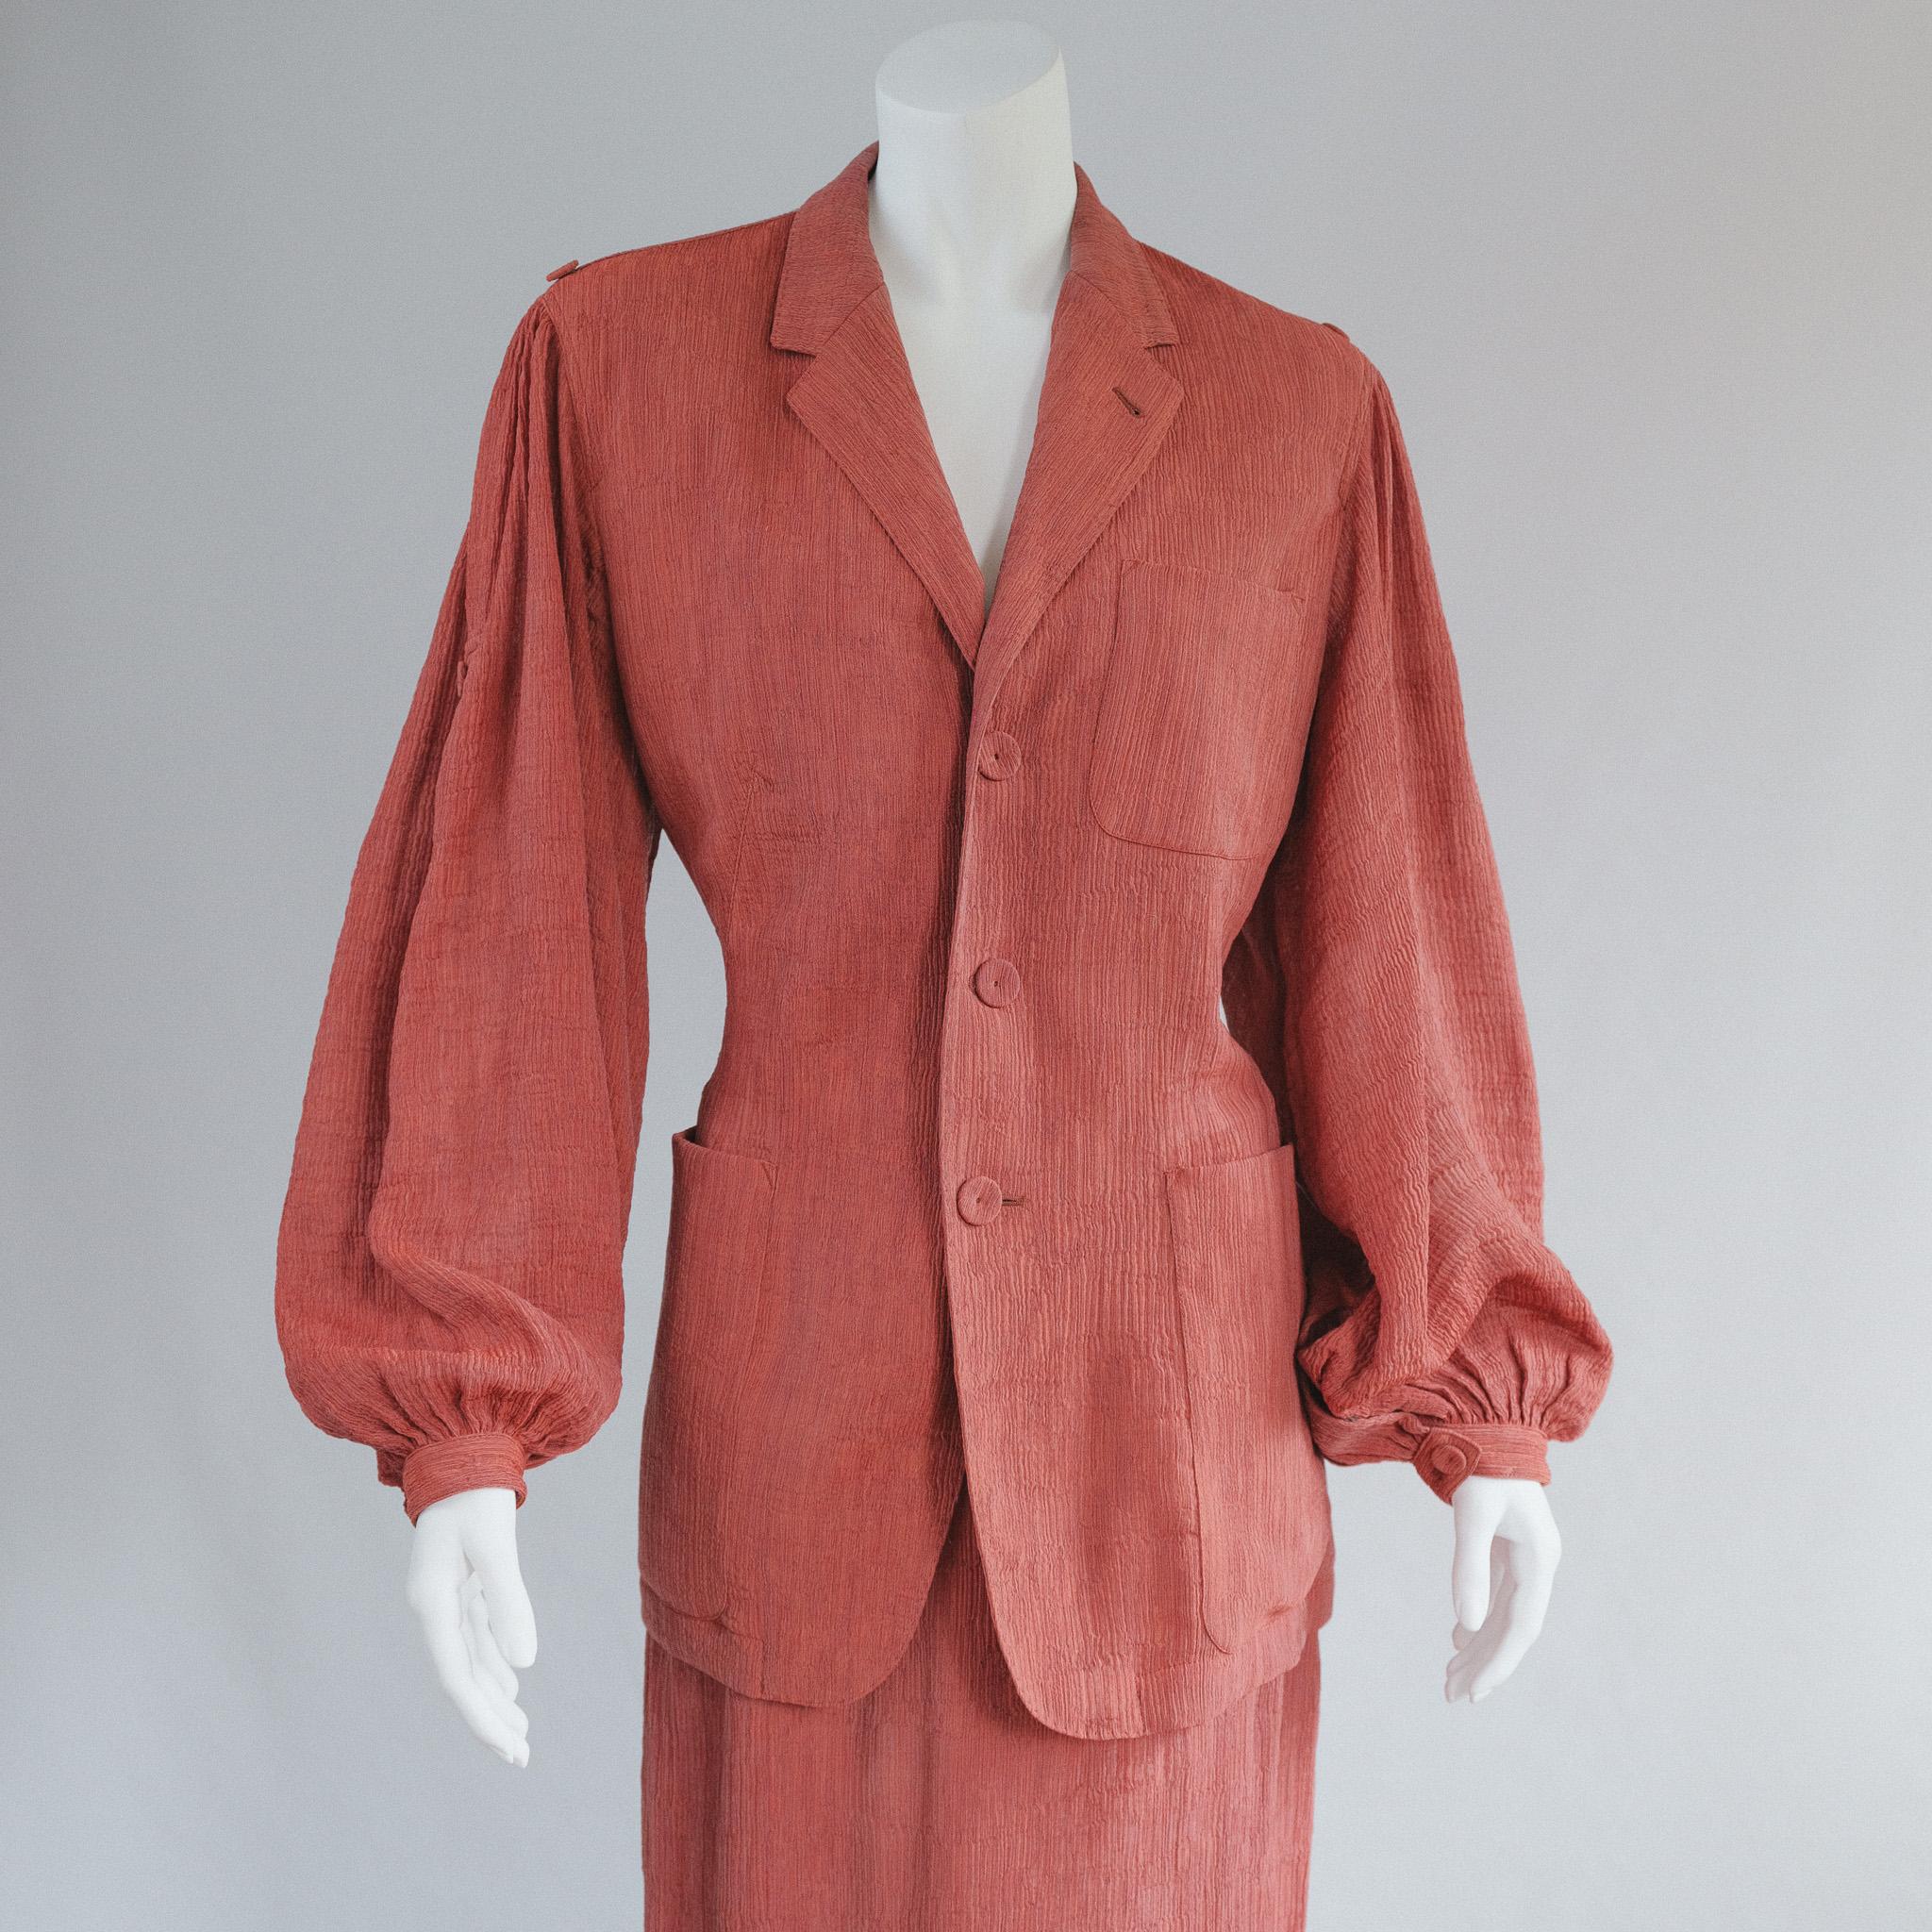 Vintage Jean Paul Gaultier Femme Brick Red Pliss Skirt Suit 
early 90s vintage Iconic and collectible
Dusty red maroon pliss rayon 

Simple blazer with over sized sleeve, full length skirt with beautiful pleated skirt detail. 
Good Vintage